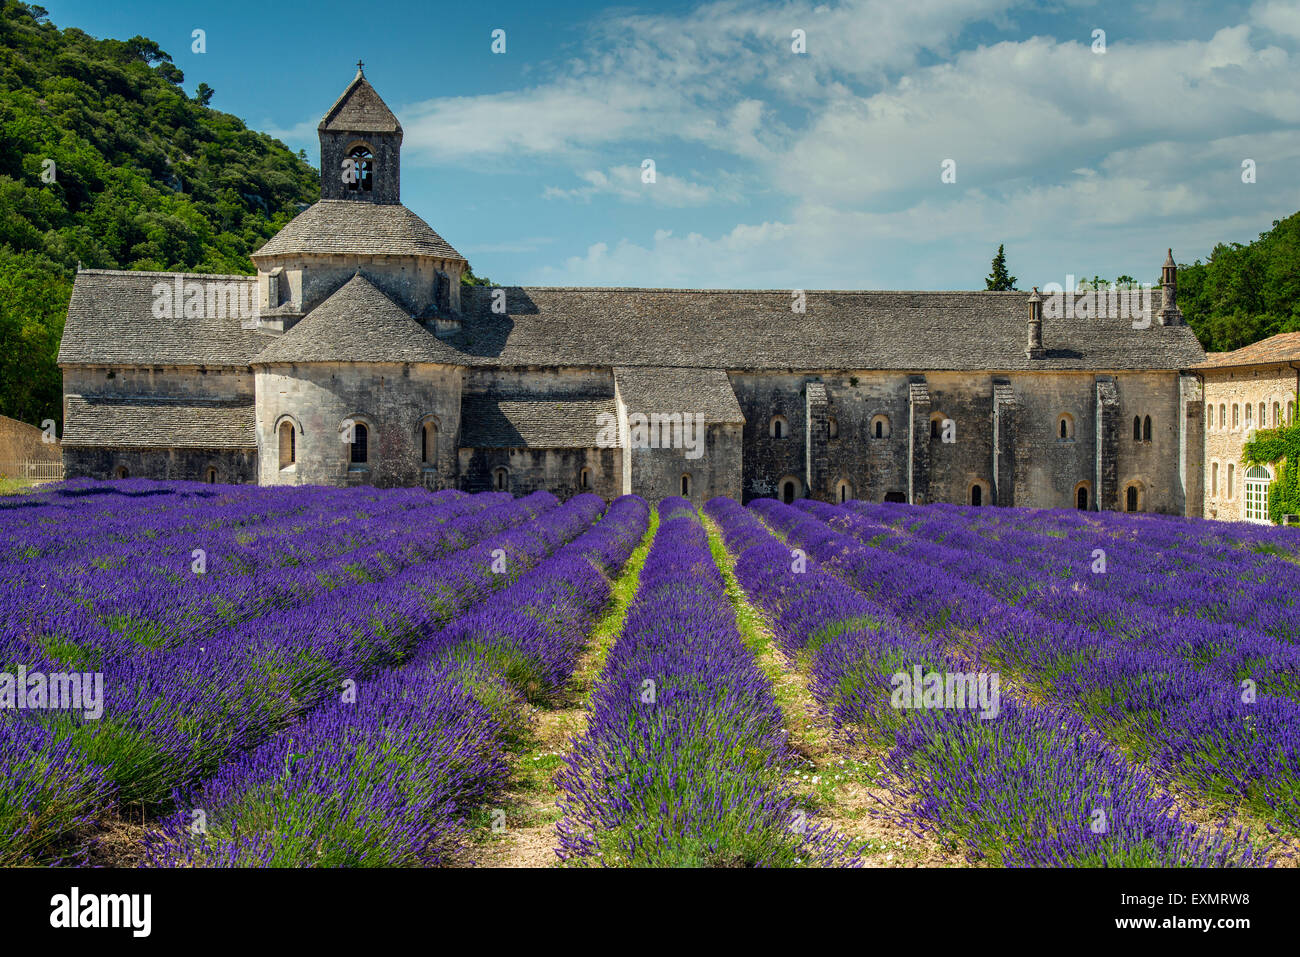 Senanque Abbey or Abbaye Notre-Dame de Senanque with lavender field in bloom, Gordes, Provence, France Stock Photo